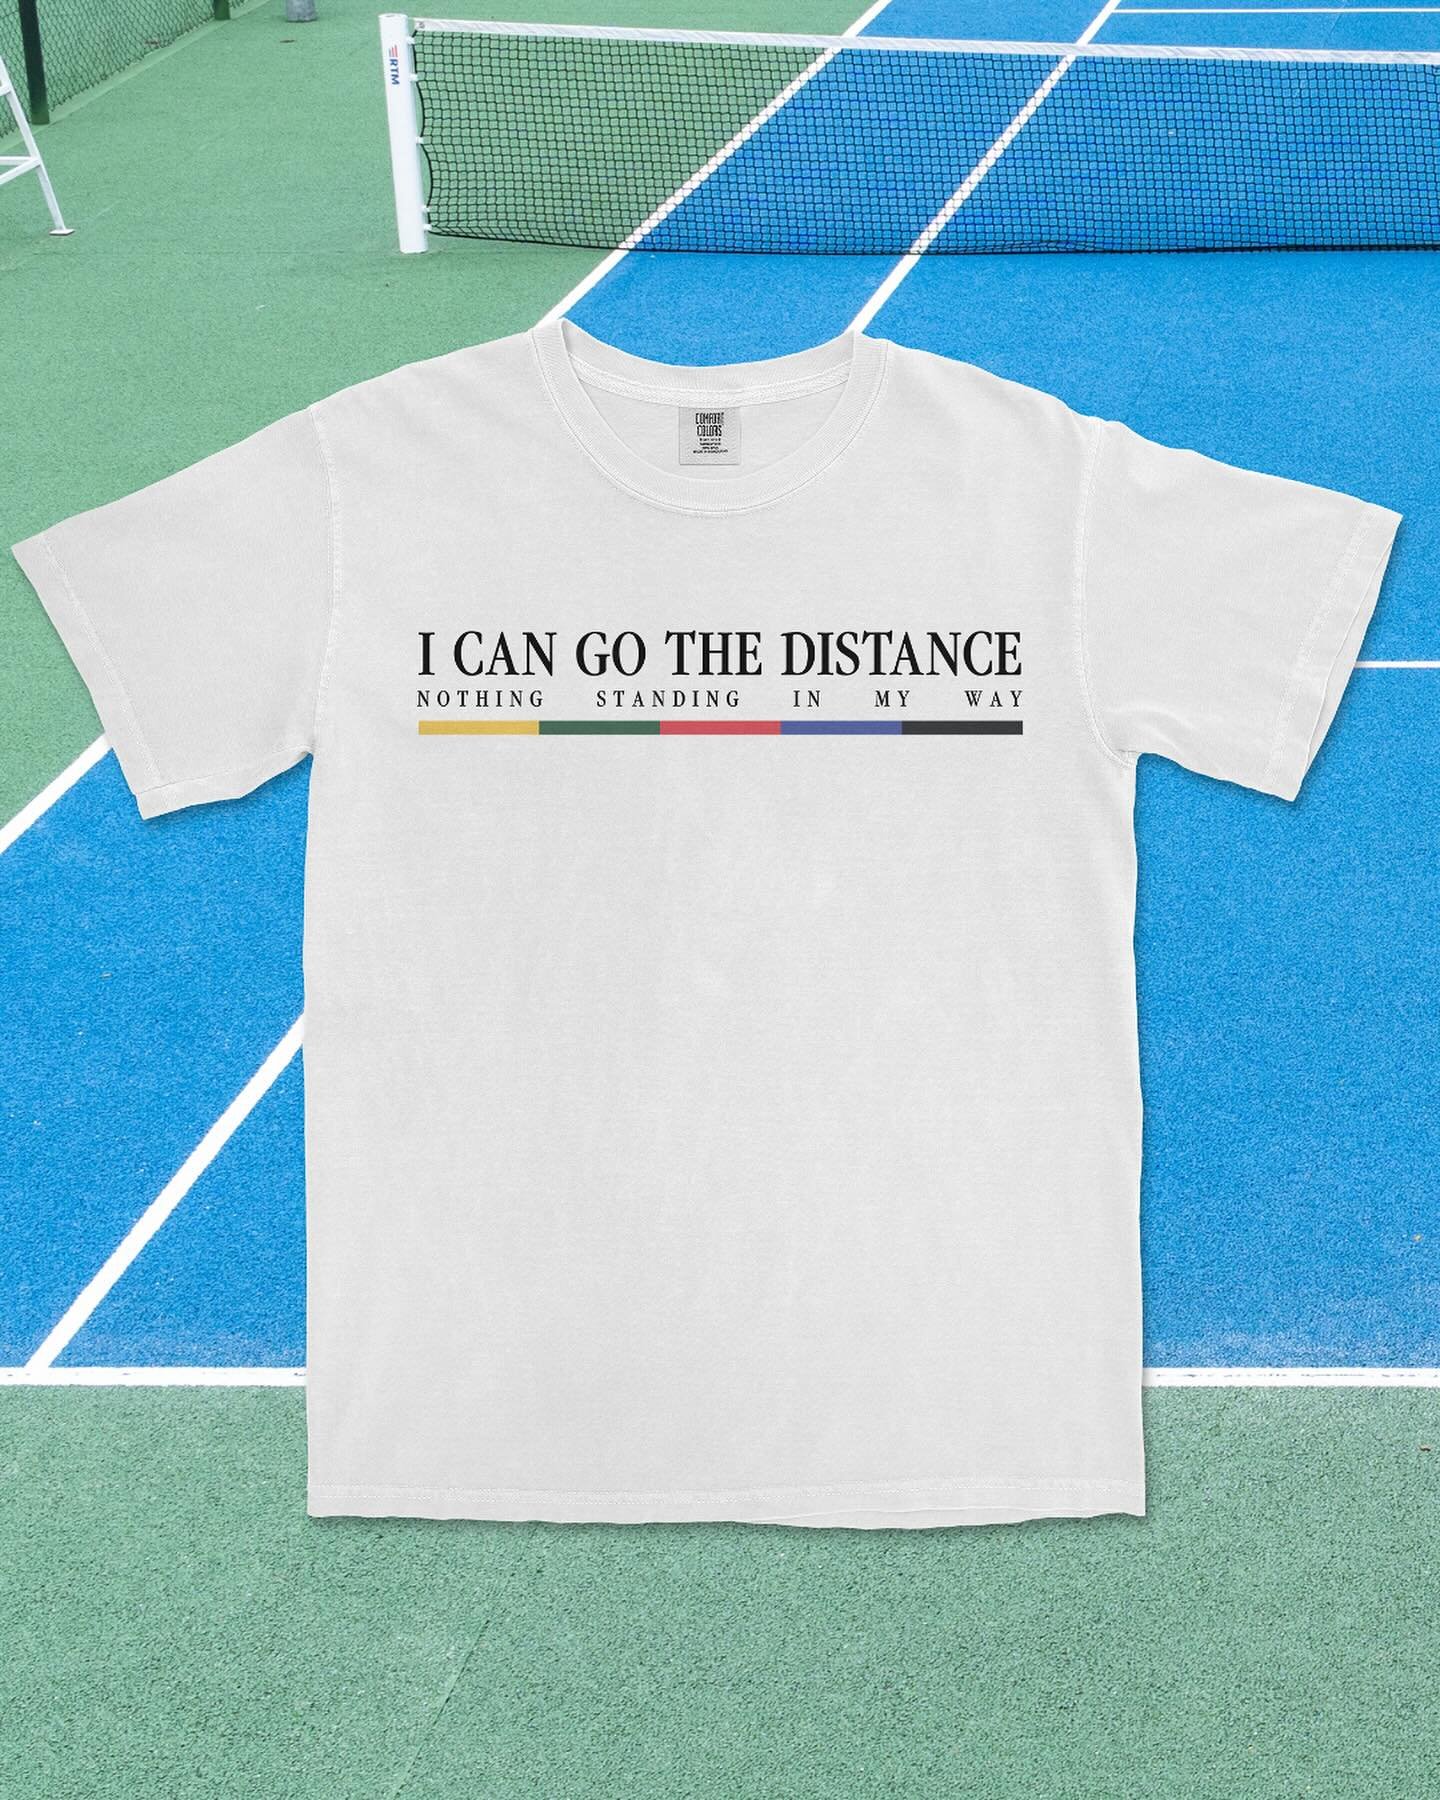 A sporty shirt to wear on your next trip to Disney - I Can Go The Distance on White Comfort Color&rsquo;s Oversize and Boxy T-shirt 

The design and the inspiration 👟🎾

As kid tennis players in the 90s and 00s Venus and Serena Williams dominated th